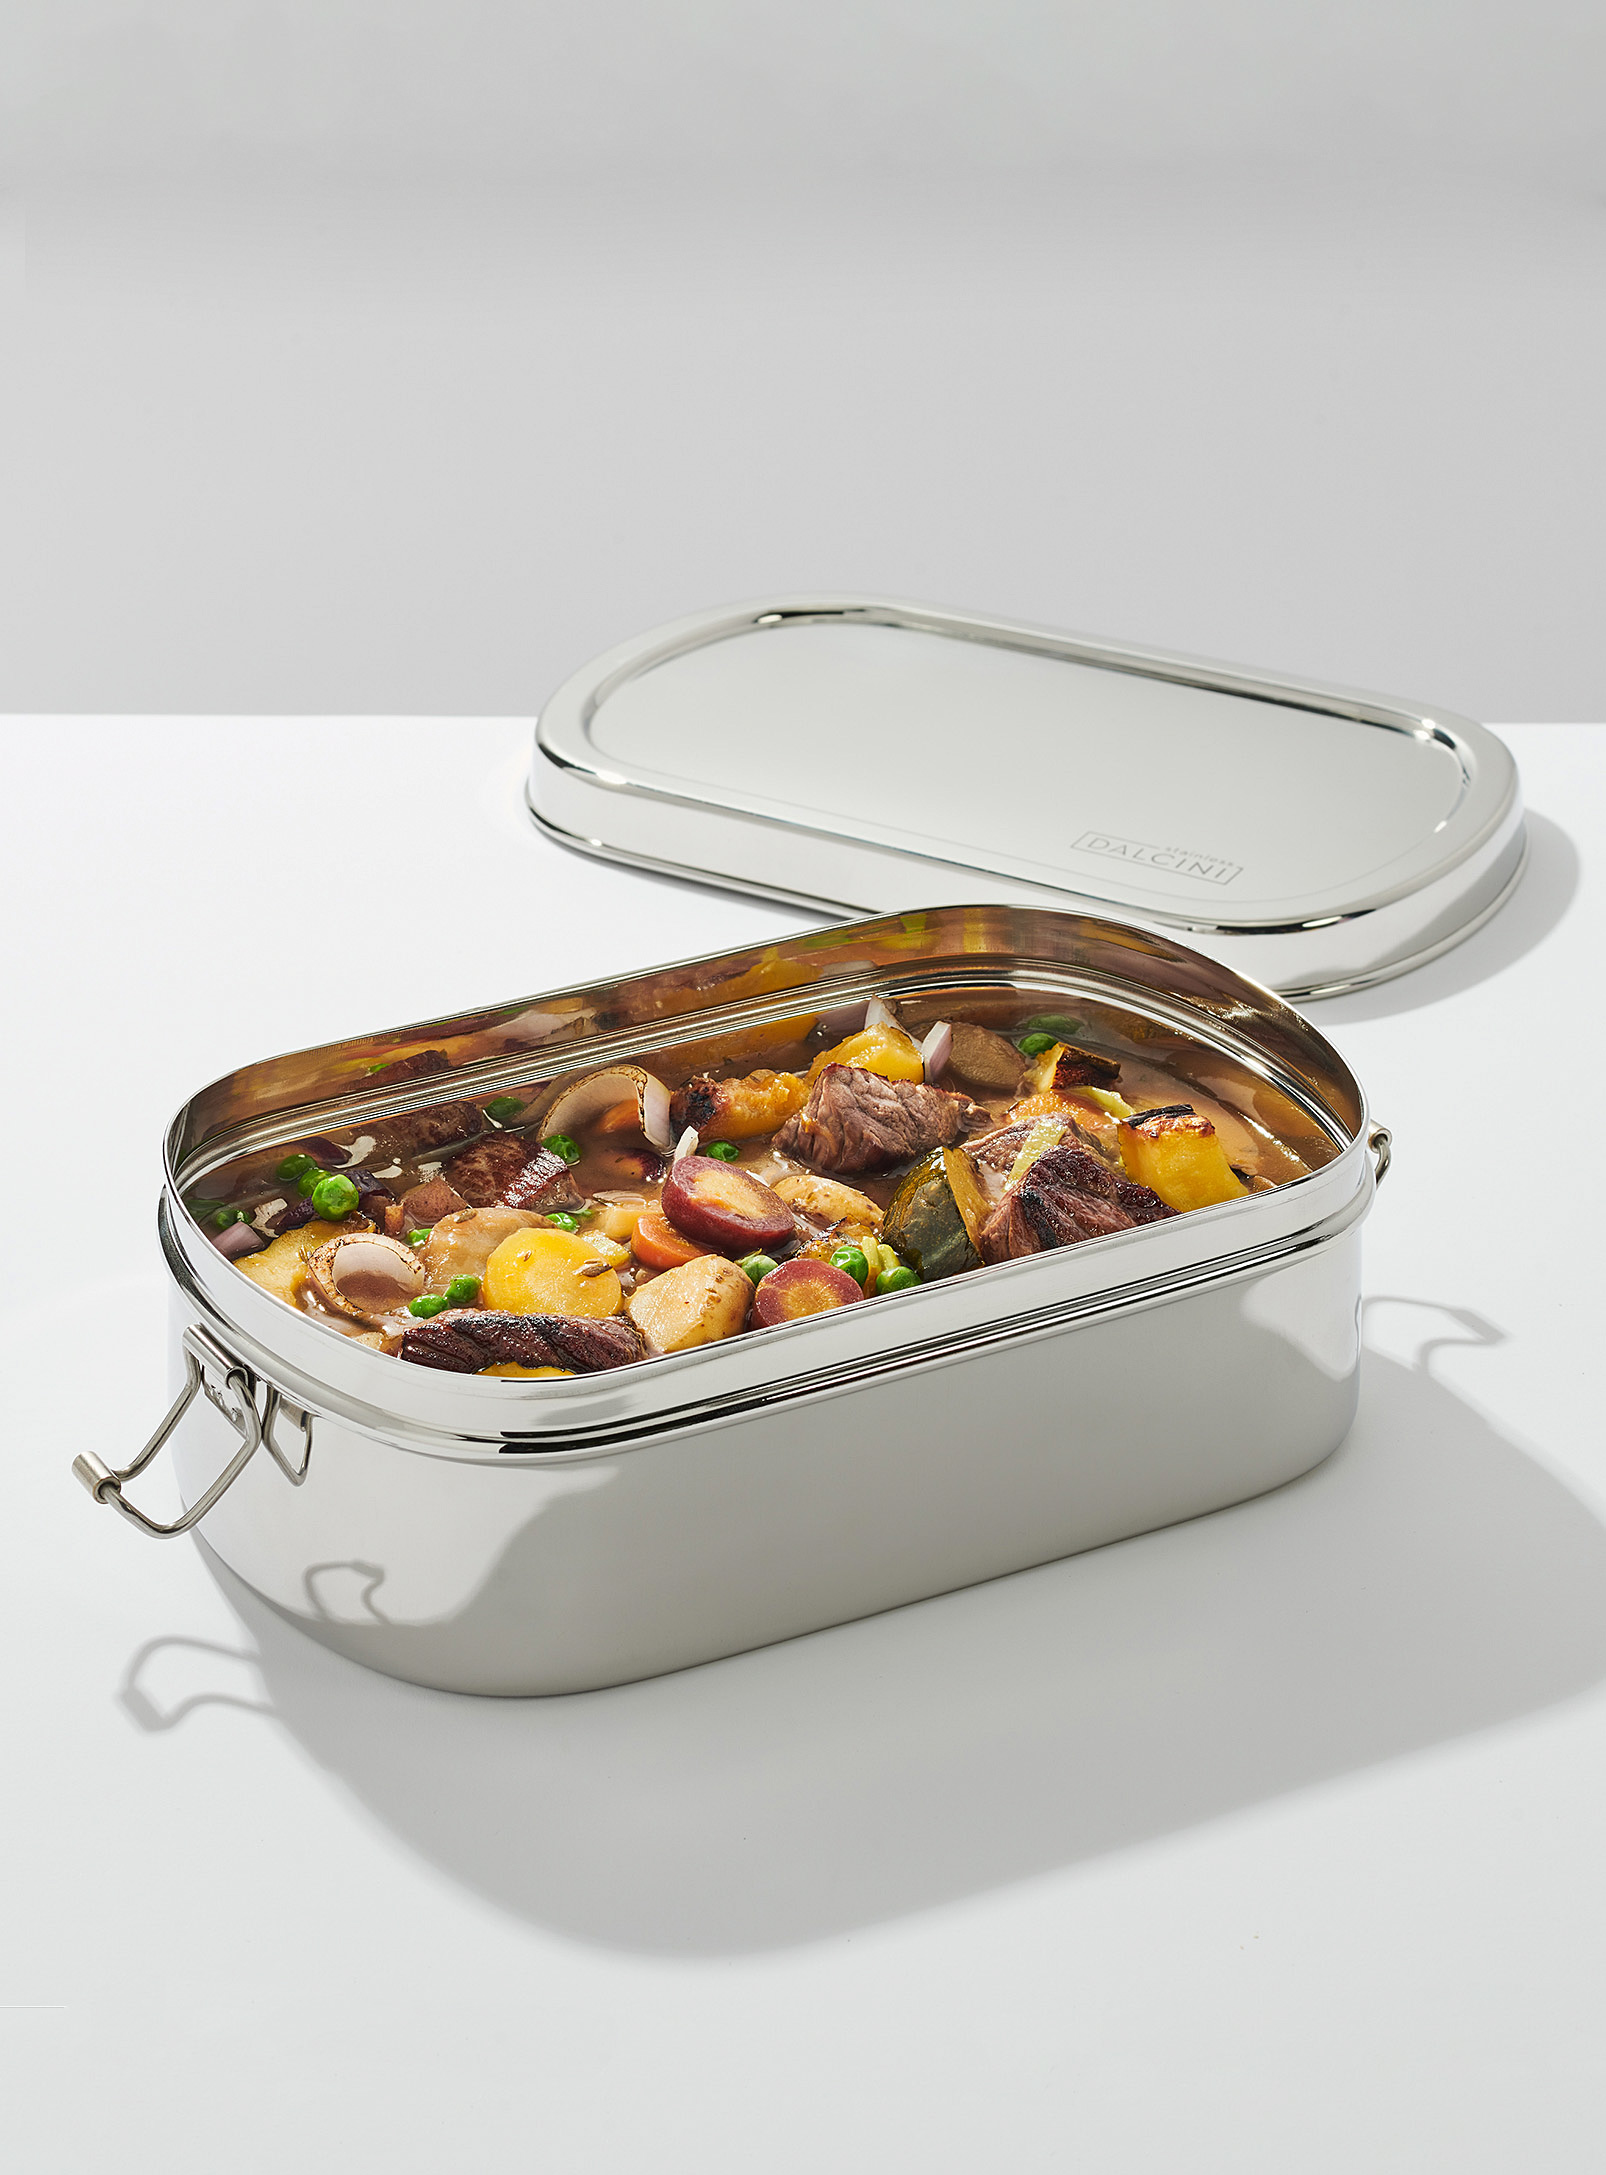 Dalcini Stainless - Oval stainless sT-Shirtl container